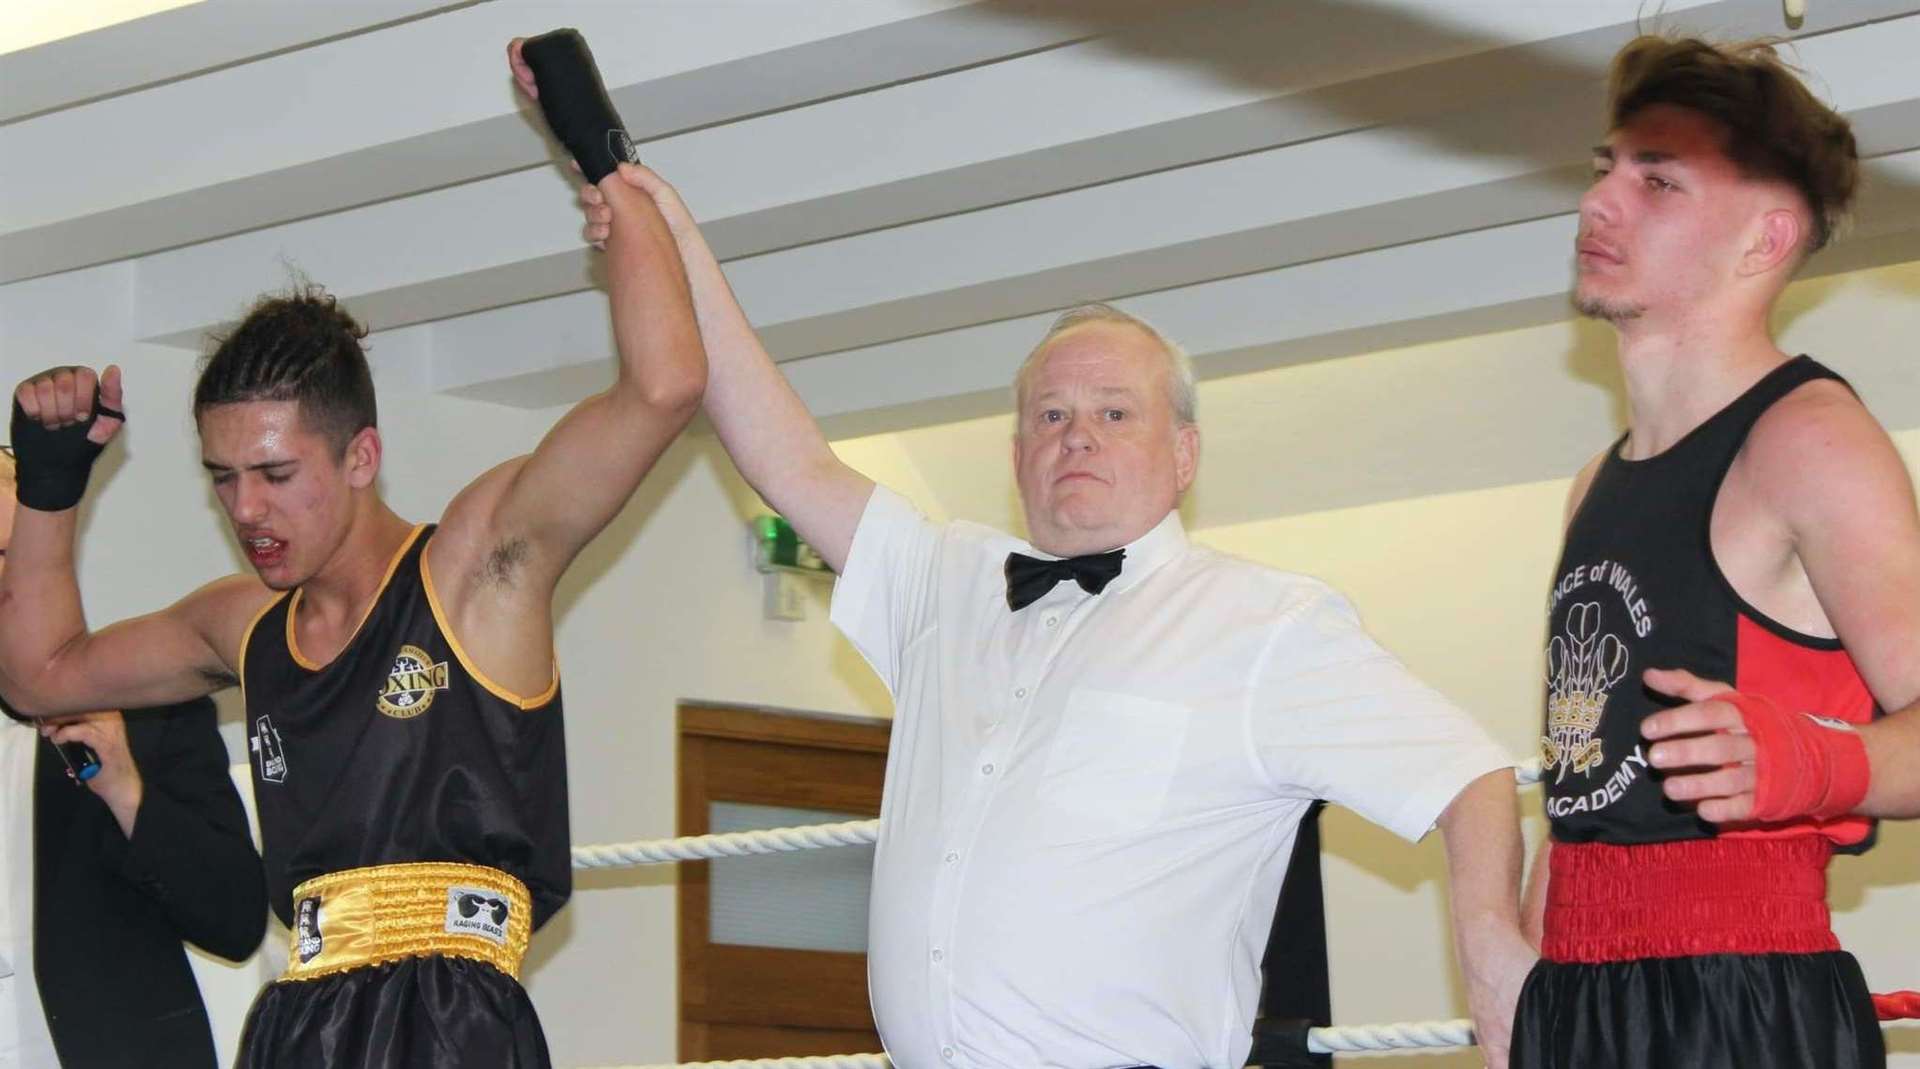 Sandwich ABC's Jules Dharni, left, beat Prince of Wales Boxing Academy's Cosmin Dobrescu in what was the show's fight